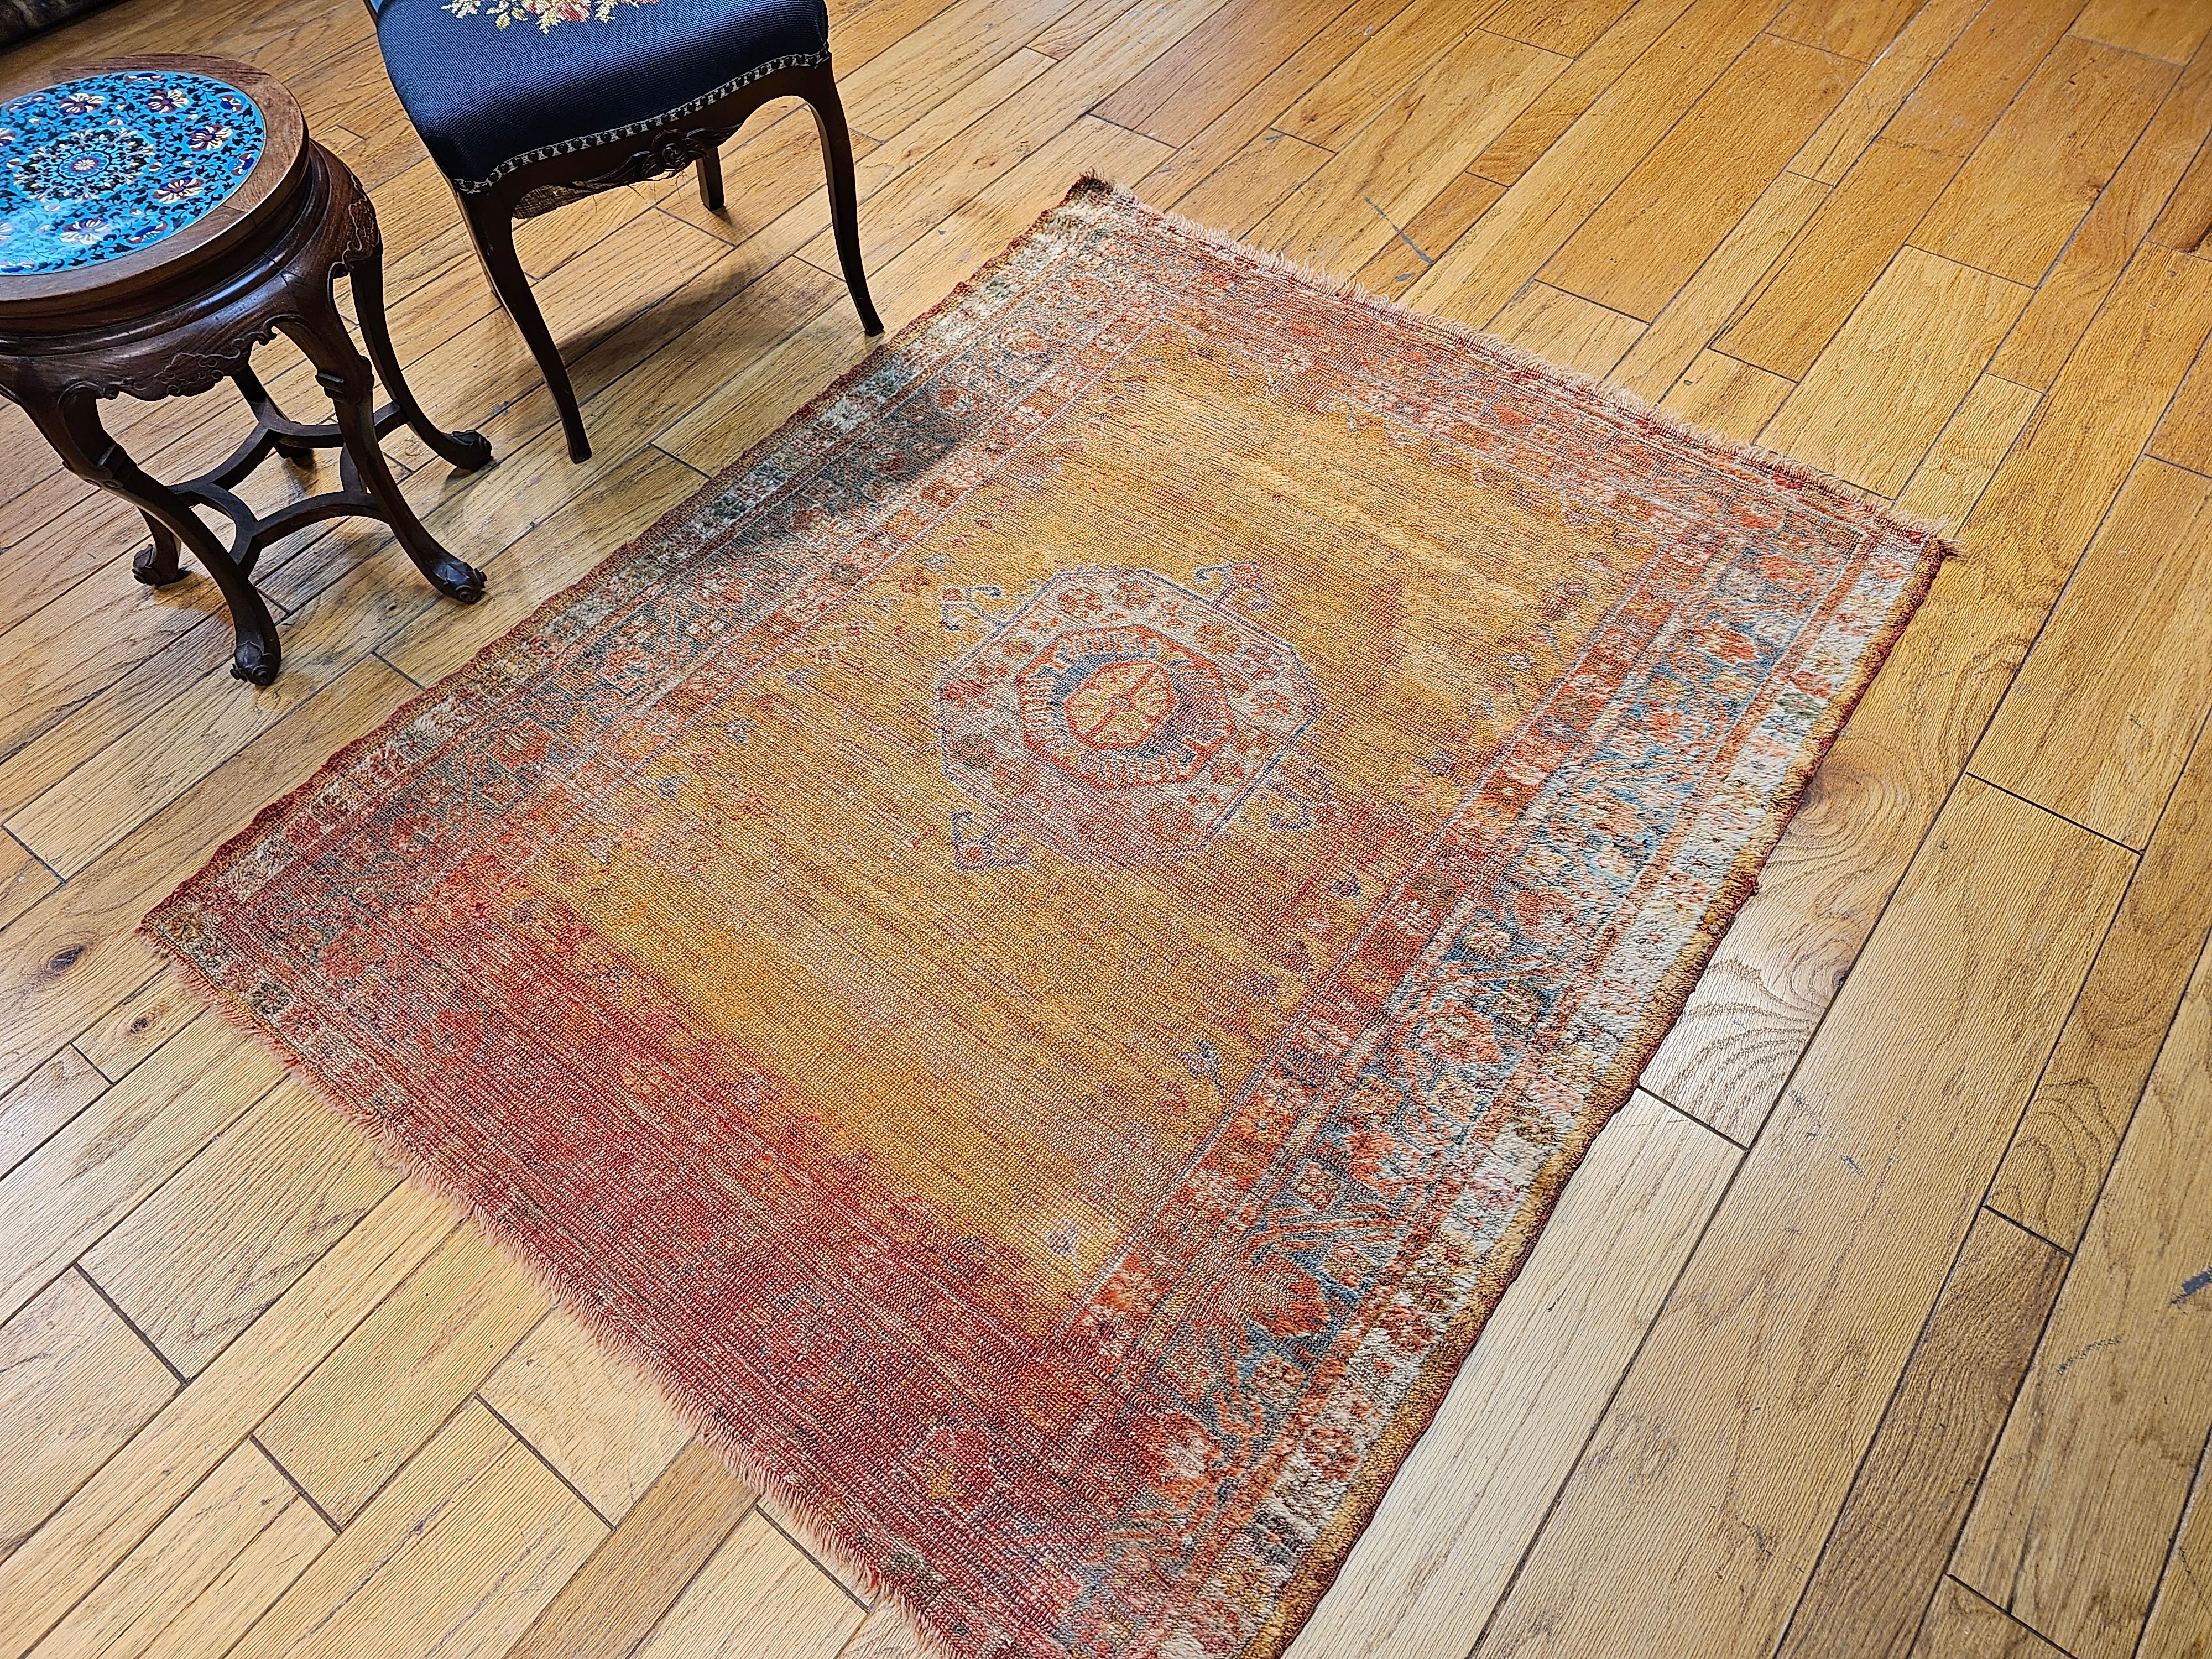 Late 19th Century Turkish Oushak Area Rug in Mamluk Pattern in Saffron, Teal For Sale 13